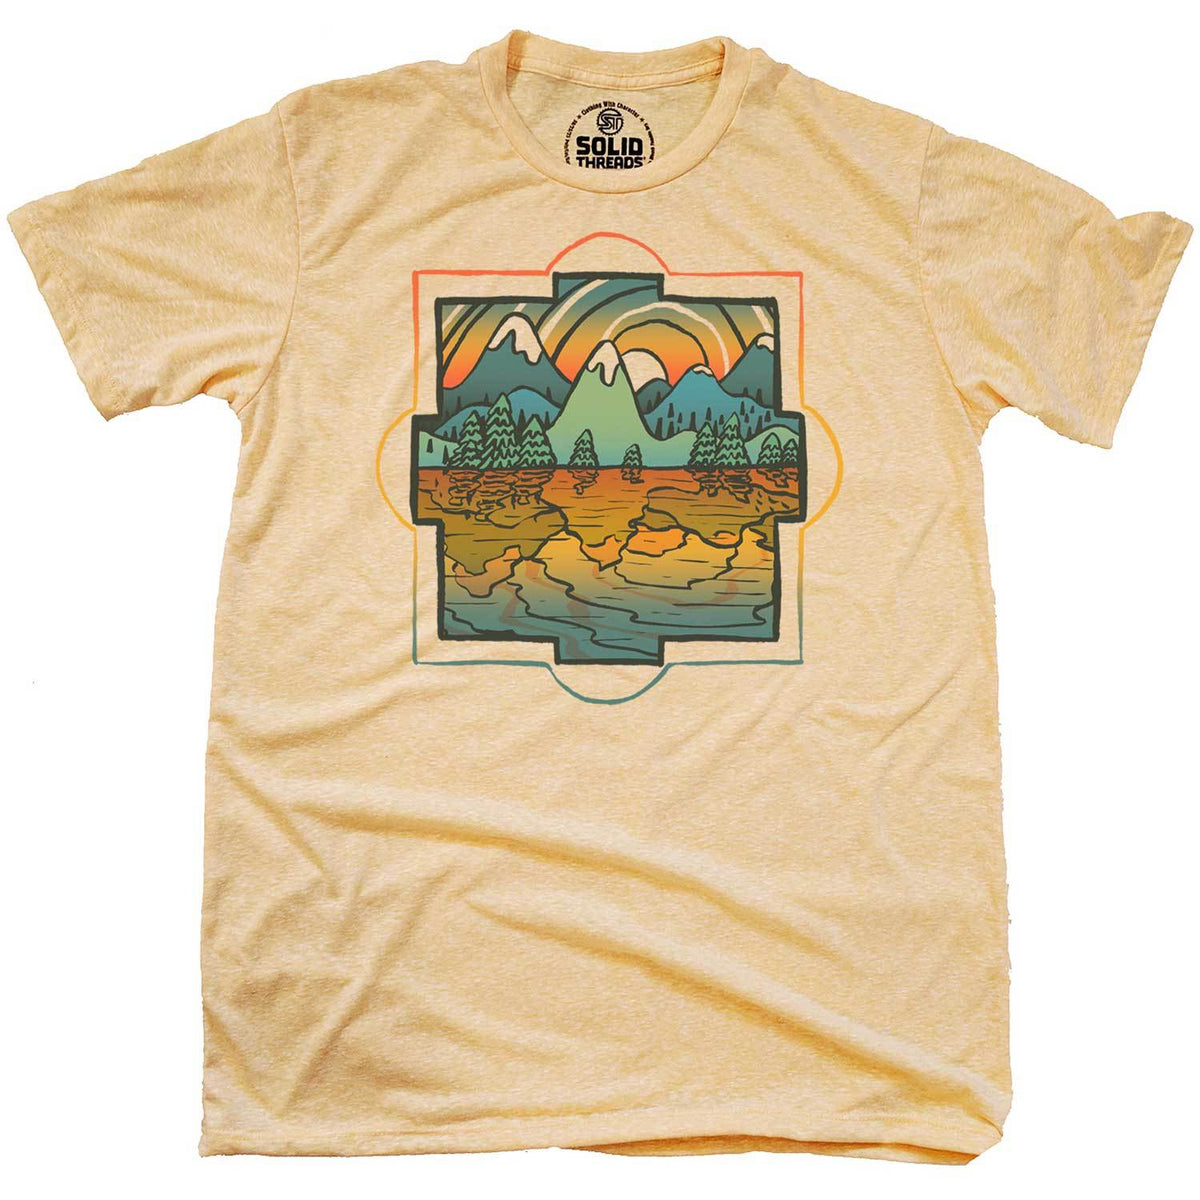 Men&#39;s Reflections Retro Colorful Lake Graphic Tee | Vintage Artsy Mountains T-Shirt | Solid Threads